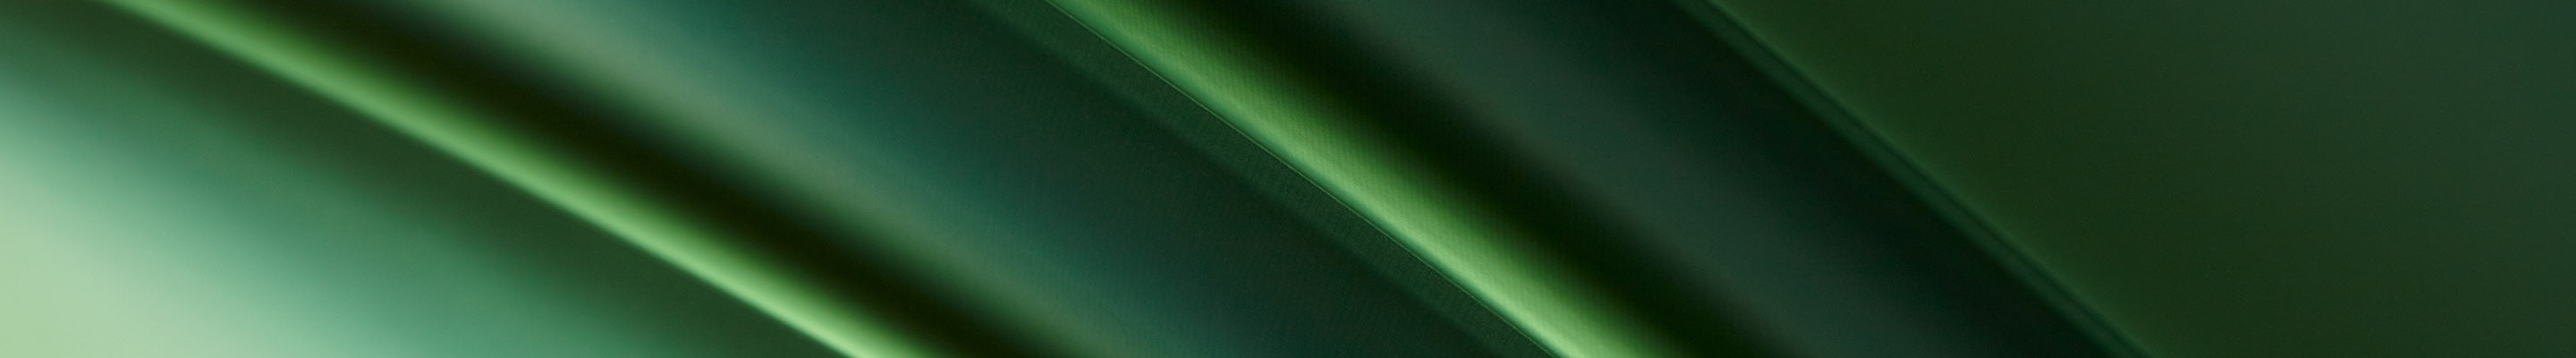 Abstract image of the Rolex brand green colour